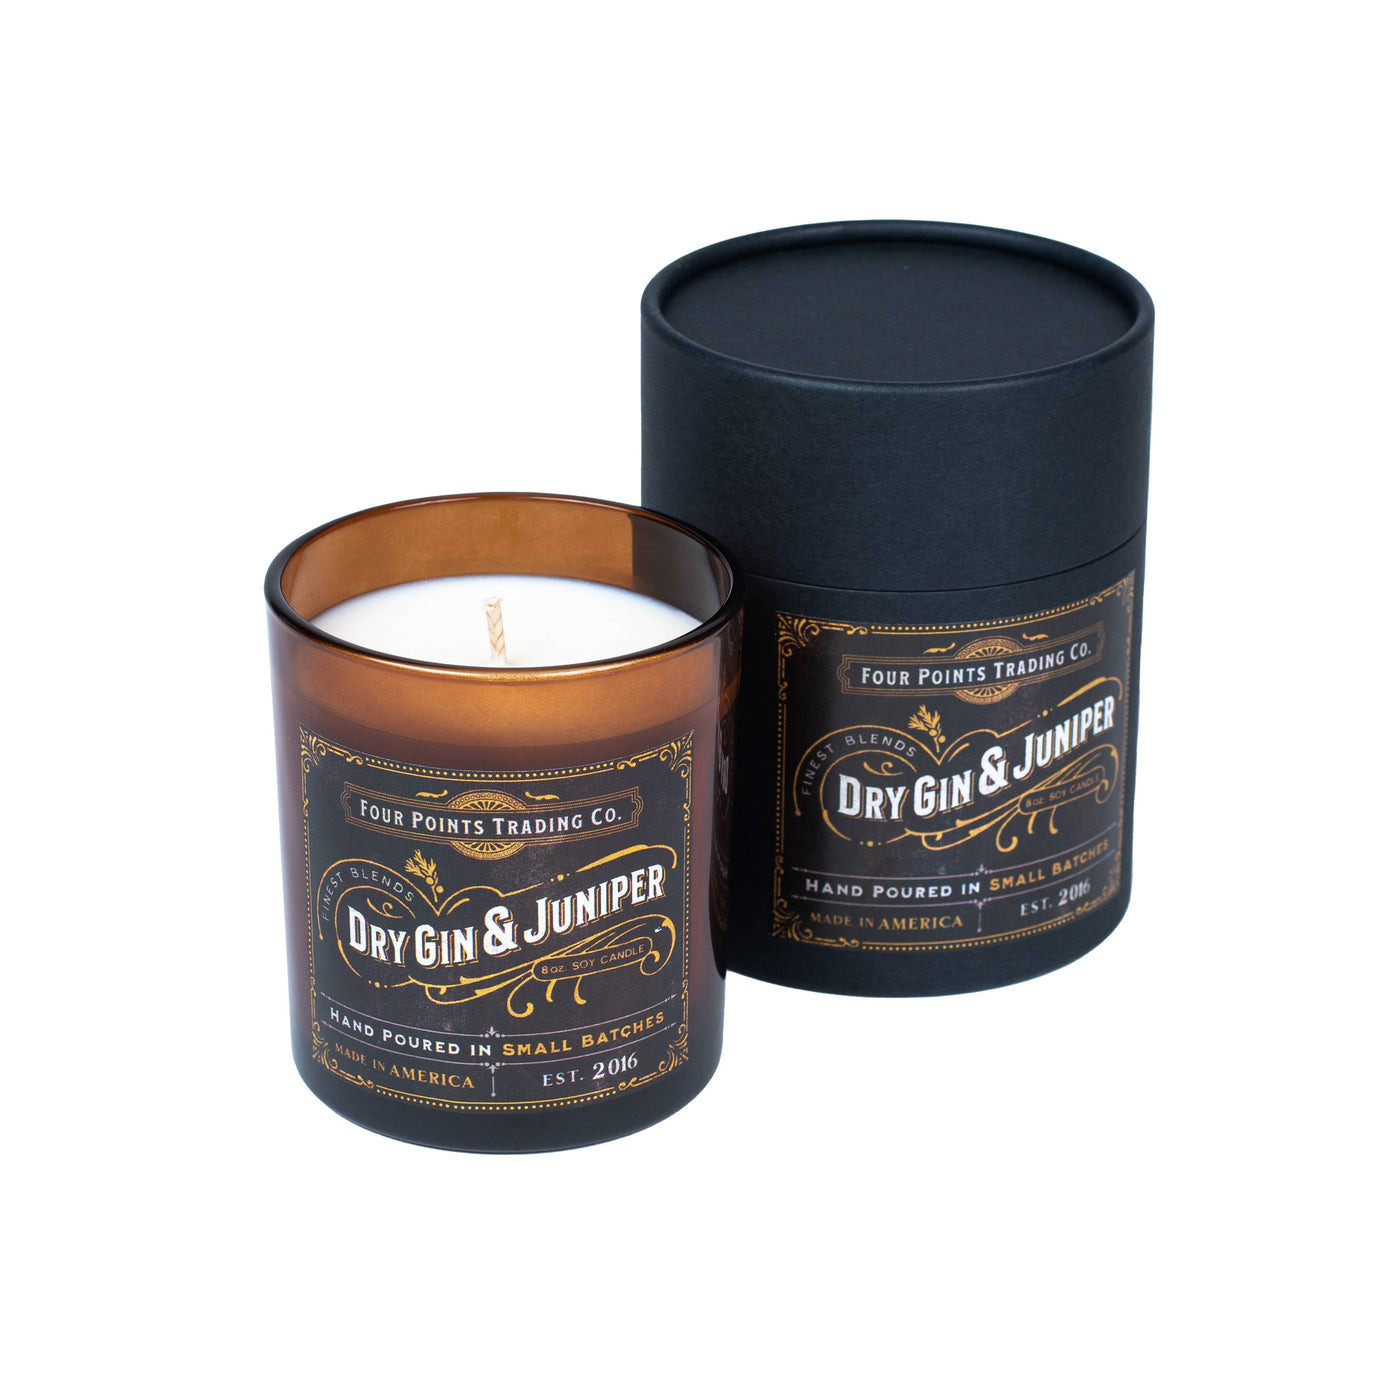 Four Points Trading Co - Dry Gin & Juniper 8 oz Soy Candle